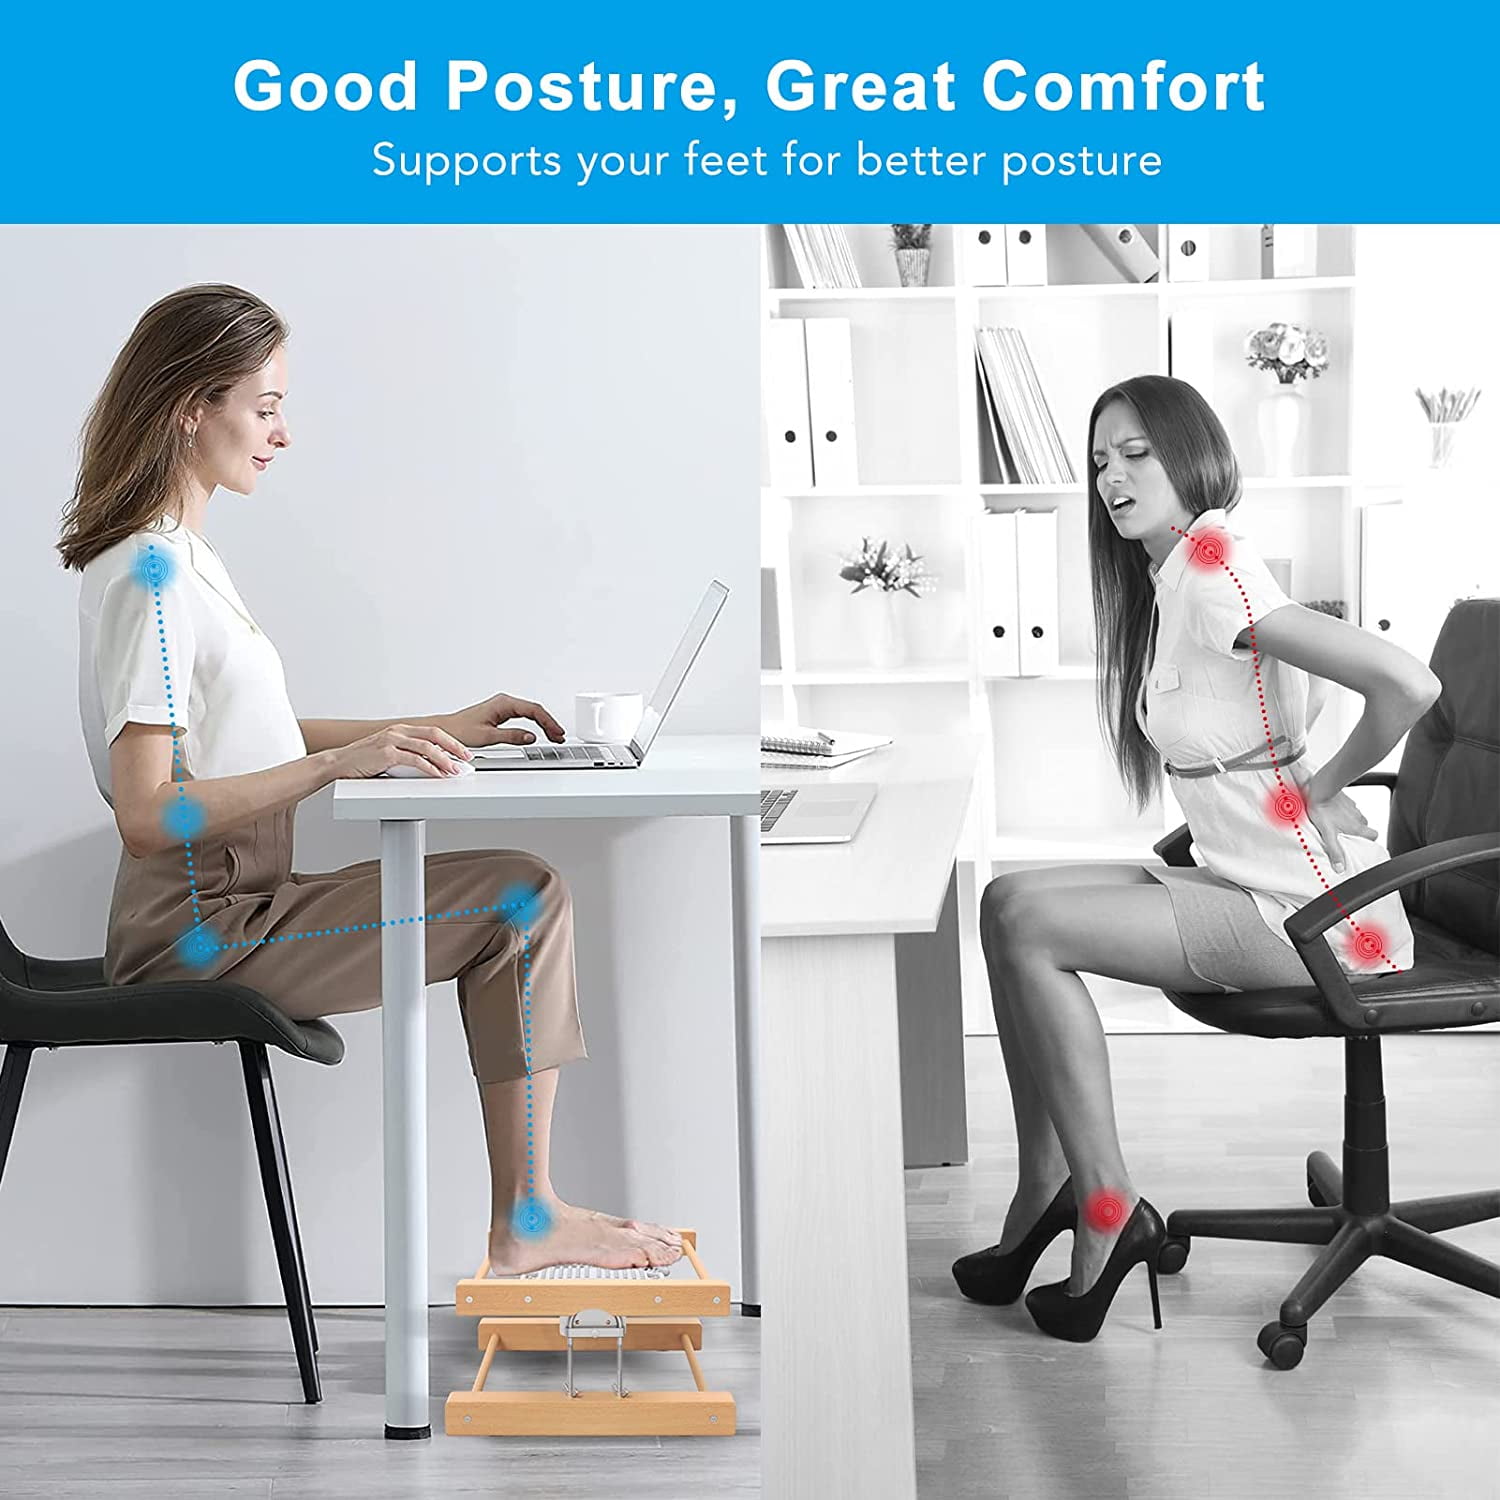 5 Pieces Adjustable Footrest Under Desk Support Footstool Ergonomic Foot  Rest 16.5“ x 11.4“ with Massage Textured Surface - AUTENS DIRECT - Global  Online Shopping for Home, Garden, Security, Outdoors, Electronics ect  Products